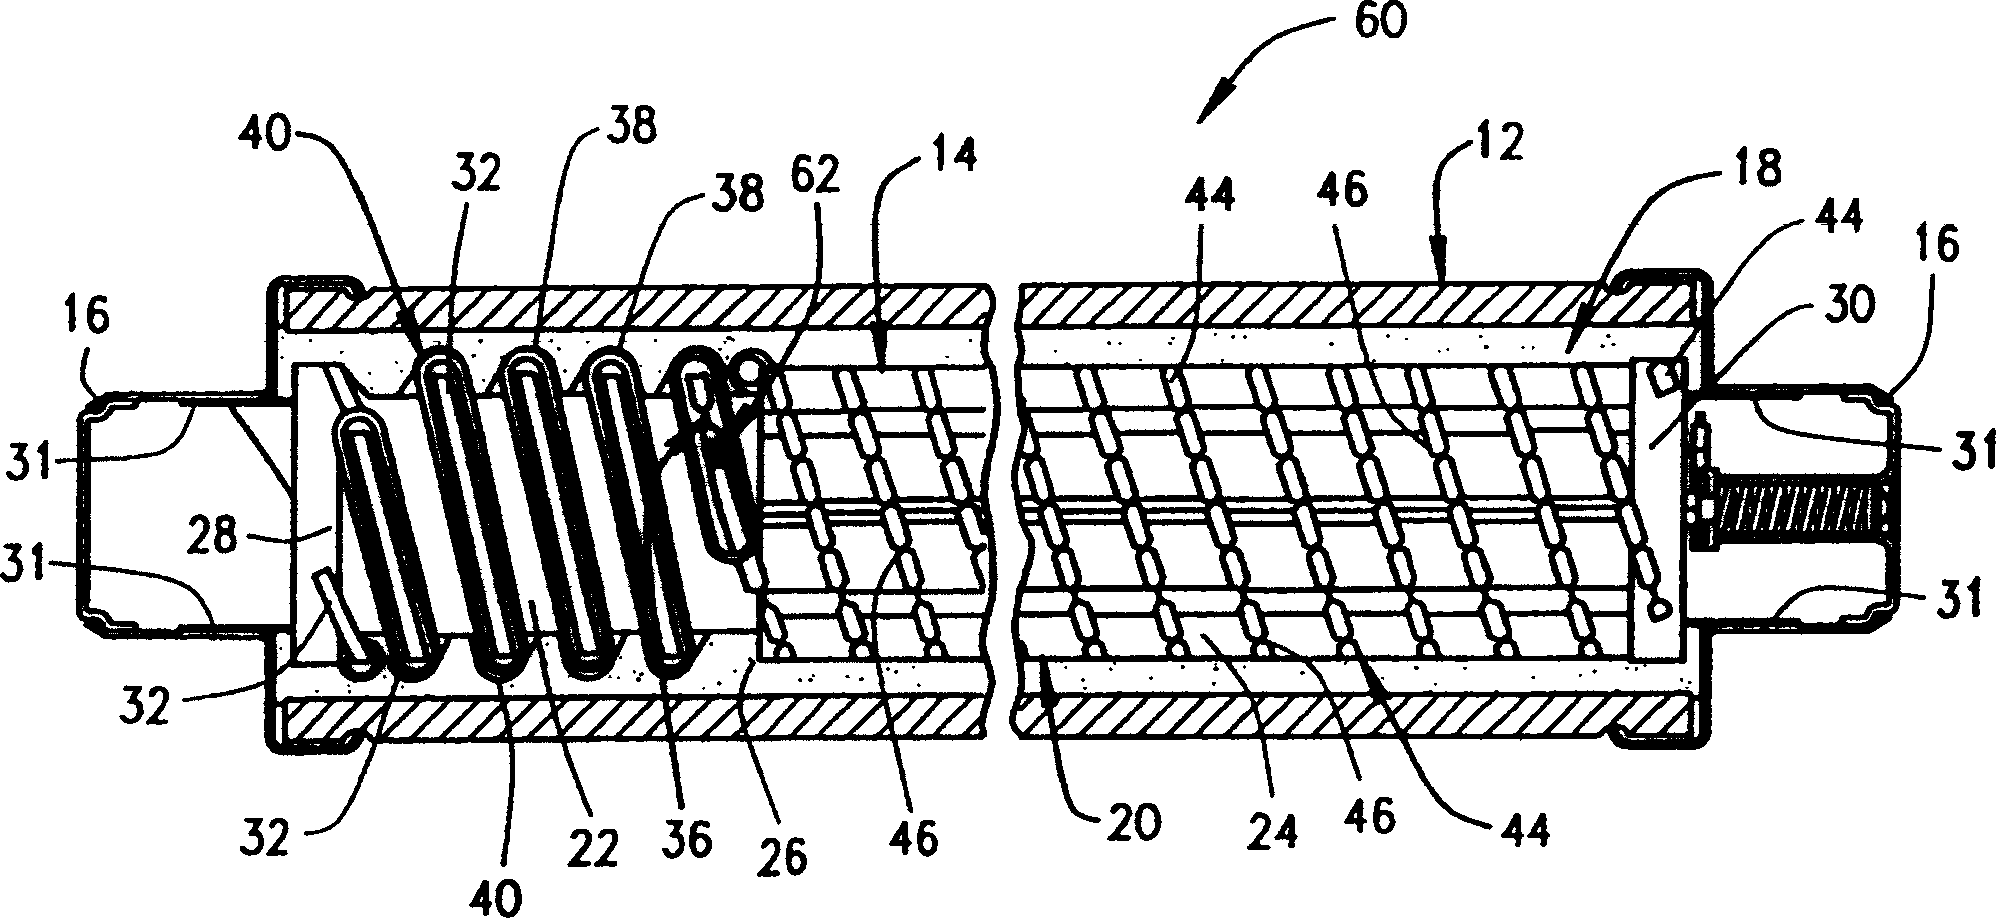 Fuse element assembly